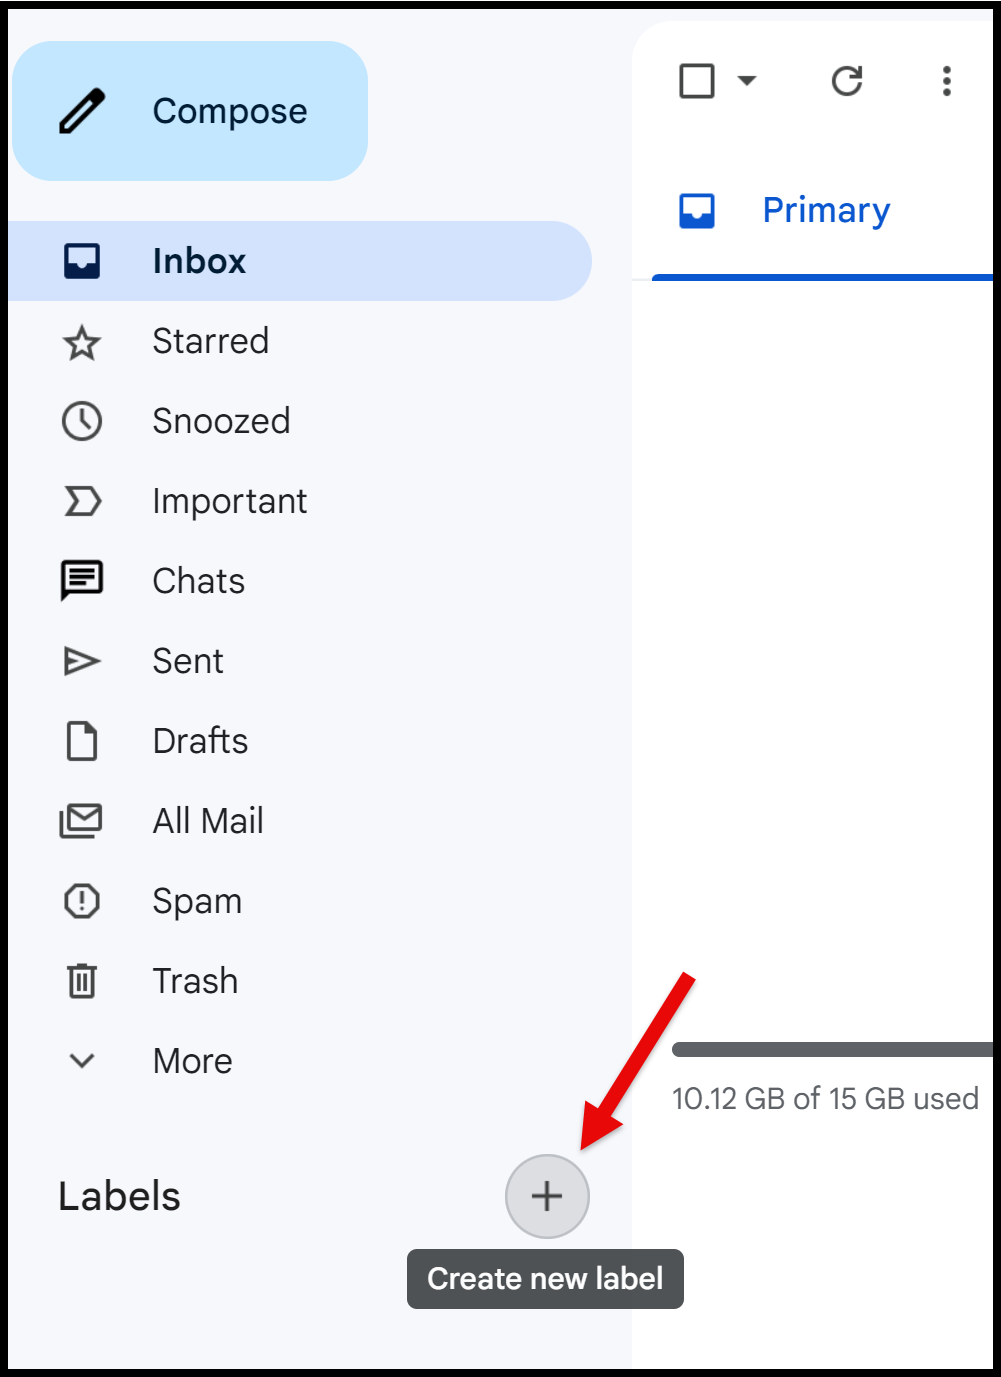 The 'Create new label' button in the left hand navigation pane is located just below the primary labels (e.g., Inbox, Starred, etc.).